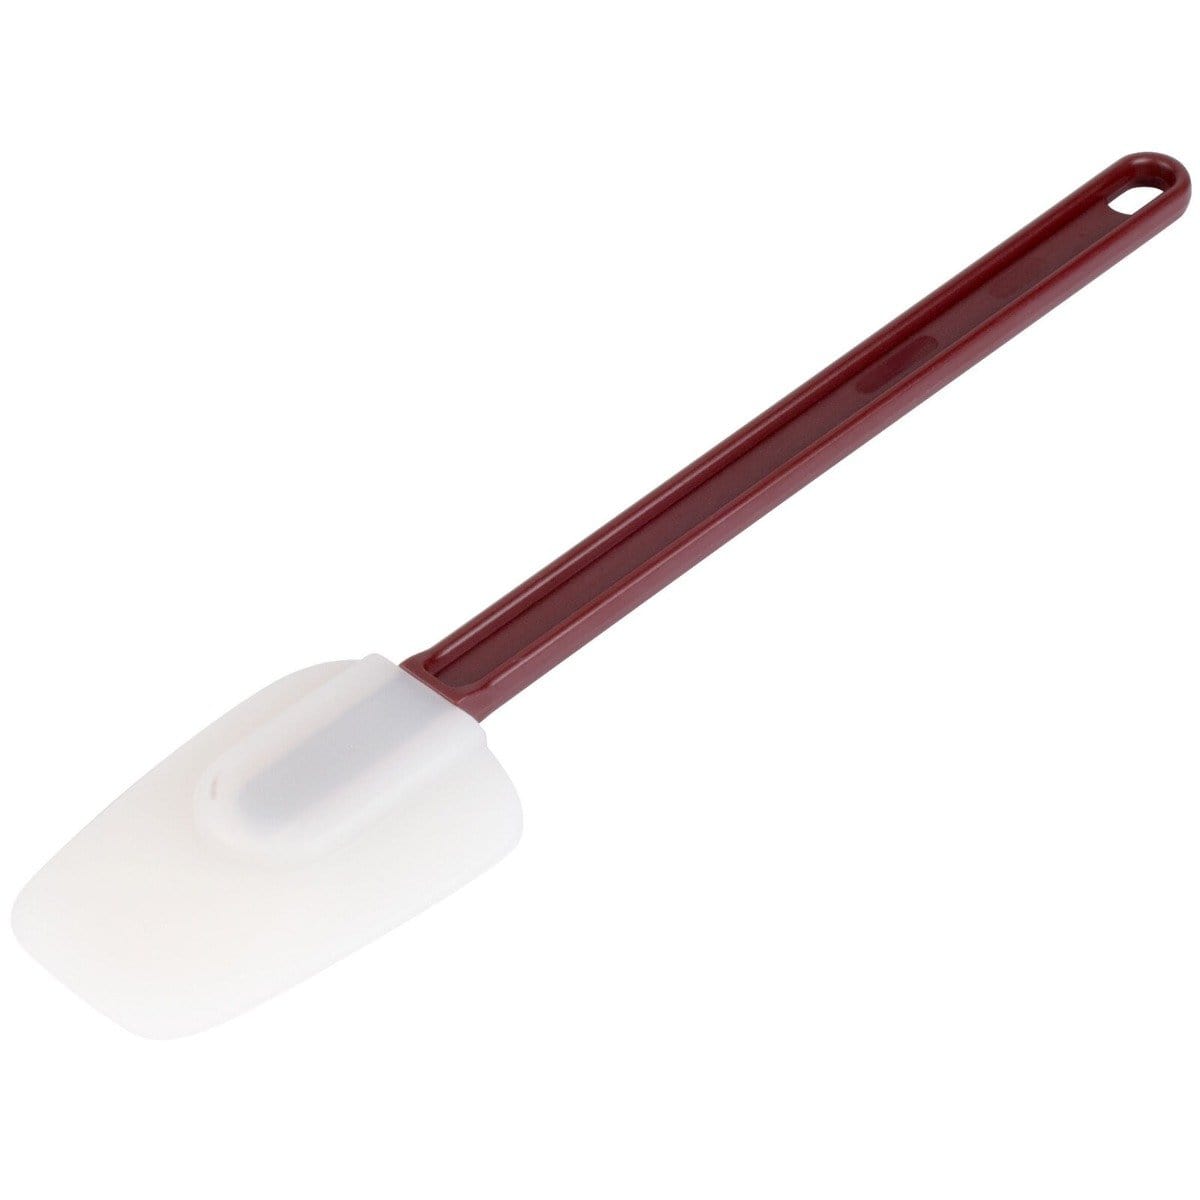 HIC Silicone Spoon Spatula Blue 11 inch - Murphy's Department Store